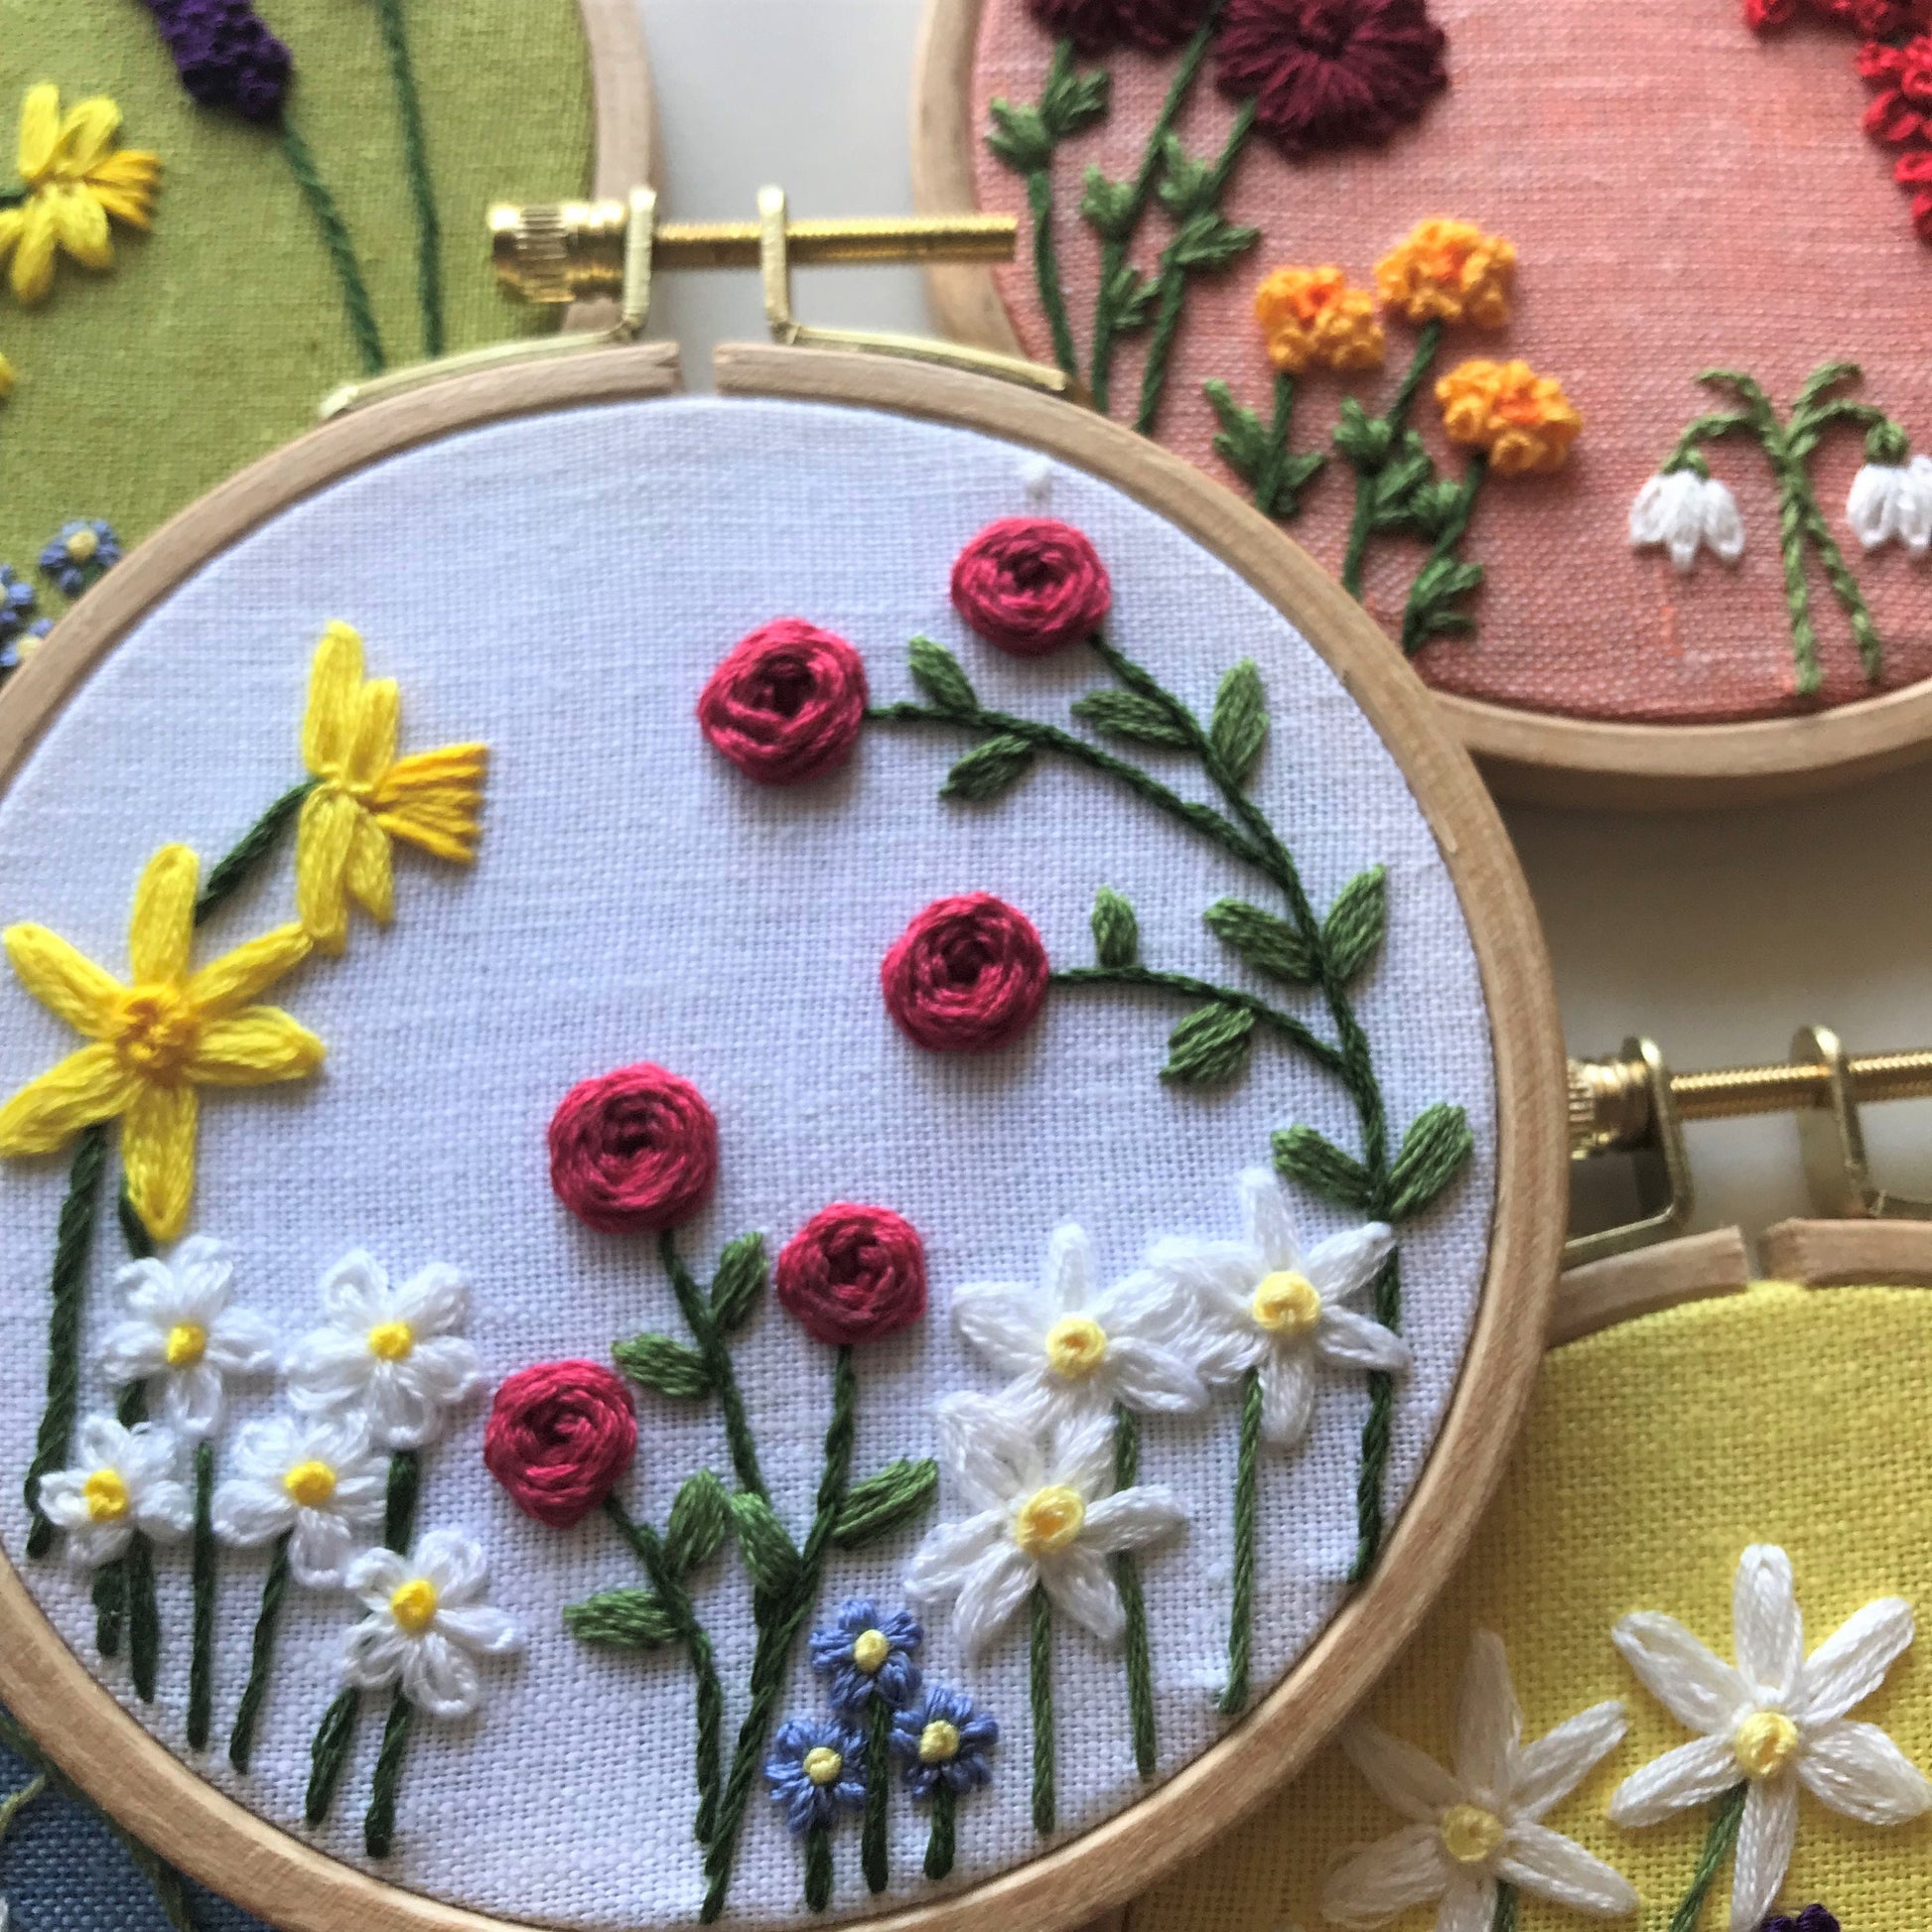 Flowers in Her Hair Embroidery Pattern (PDF)